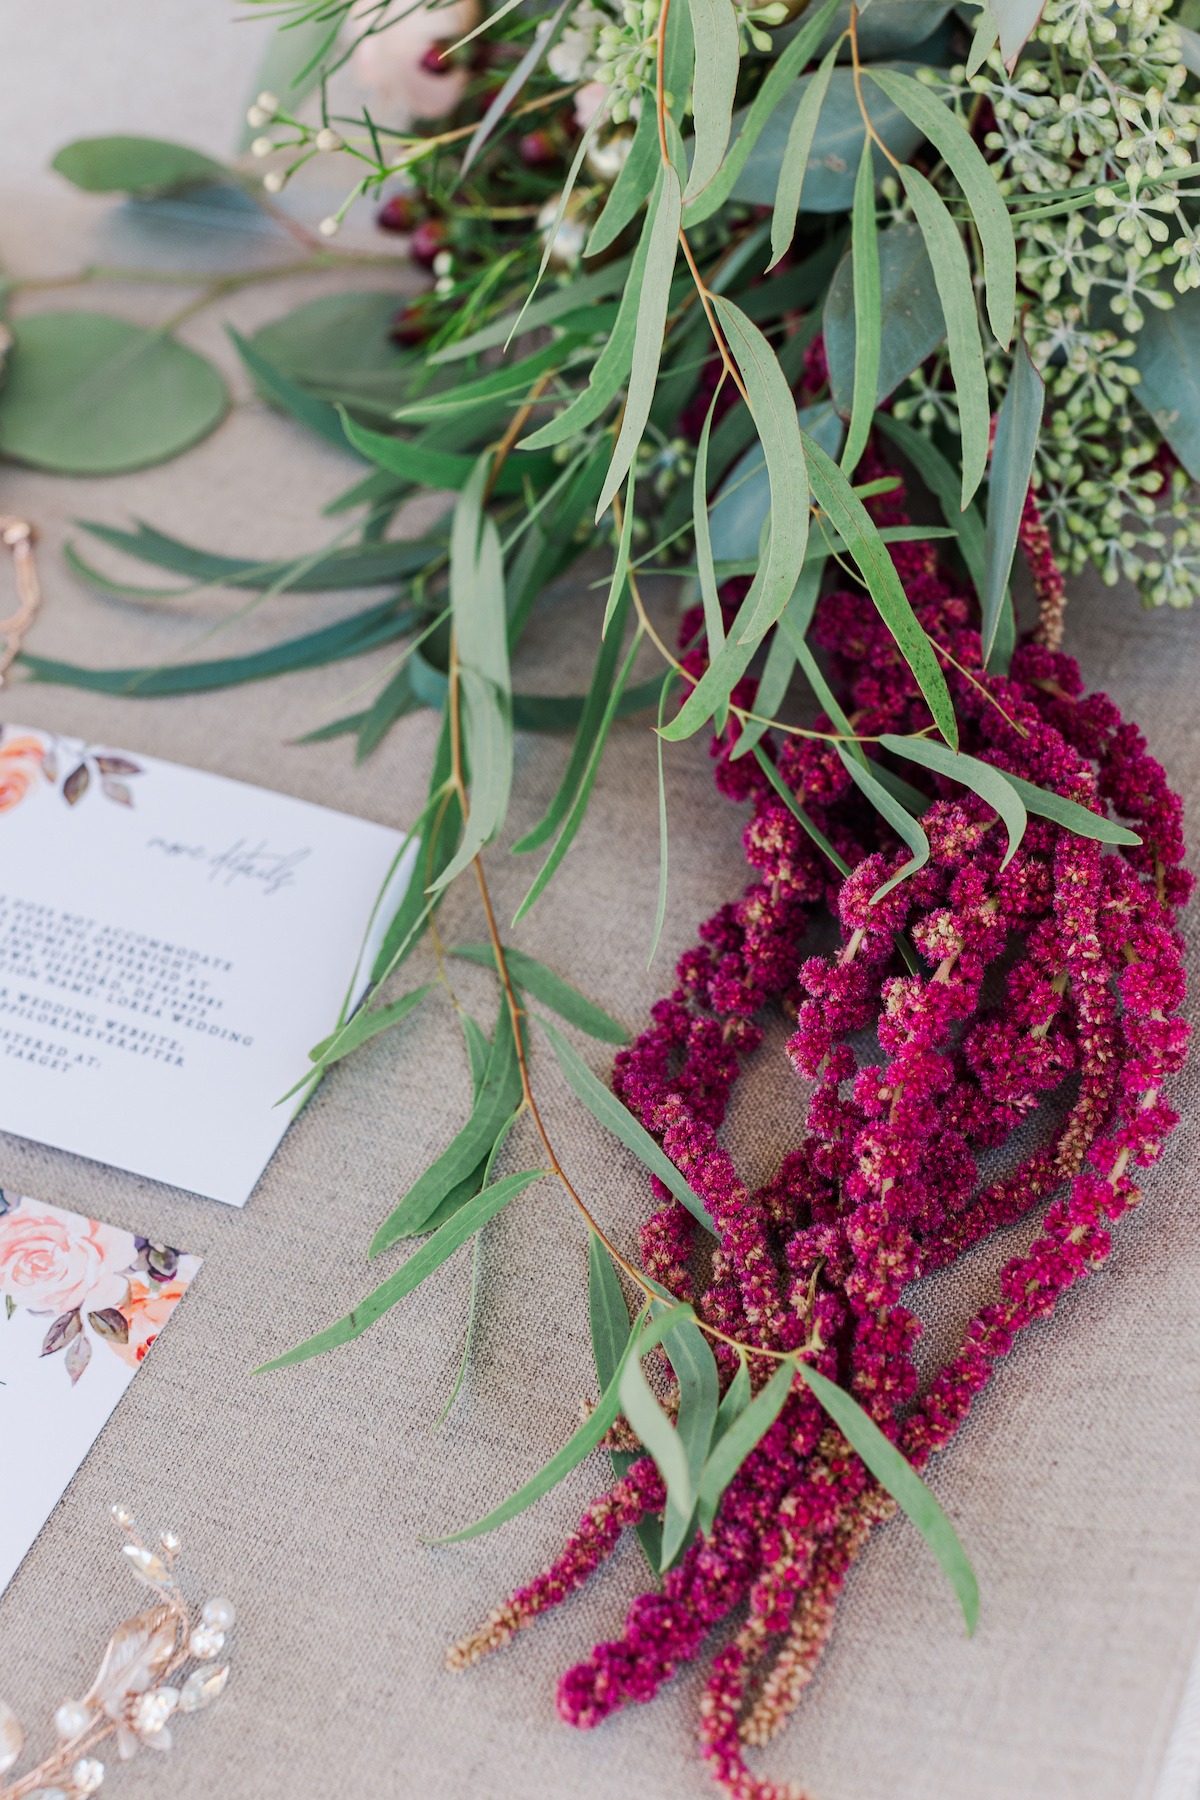 A Family-Focused, Fall Wedding Full of Personal Touches